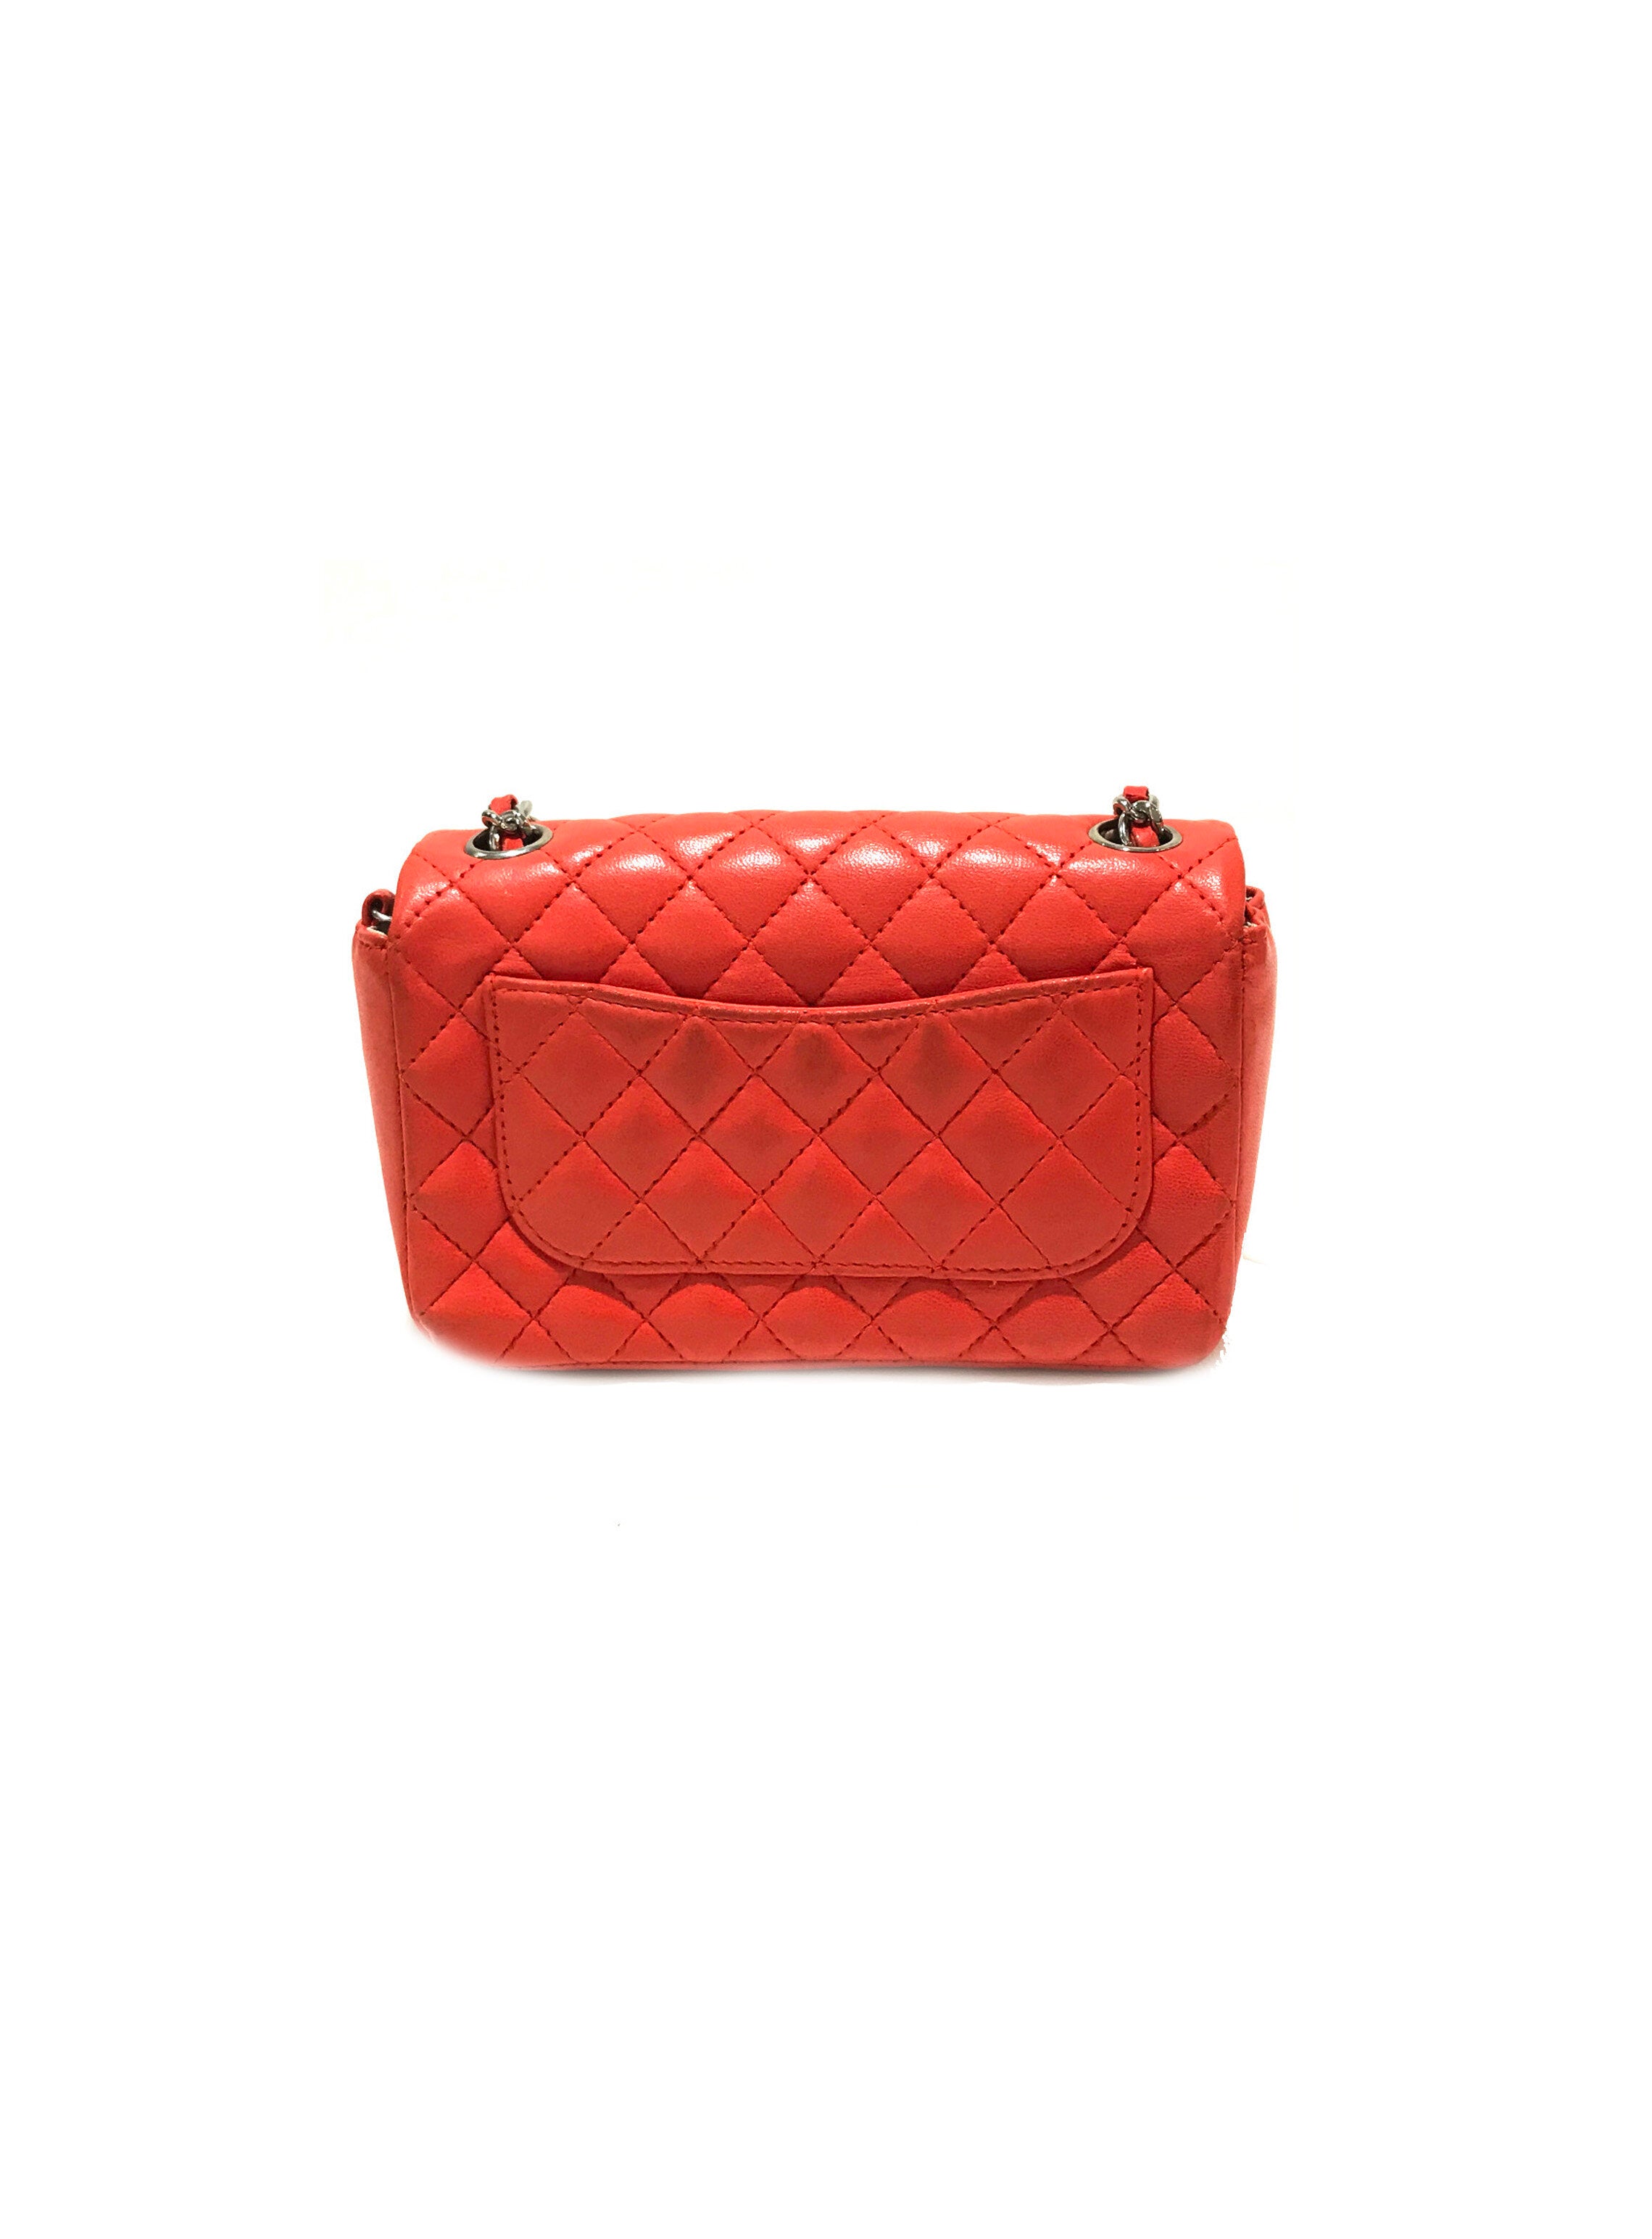 Red chanel, Chanel bag, Chanel